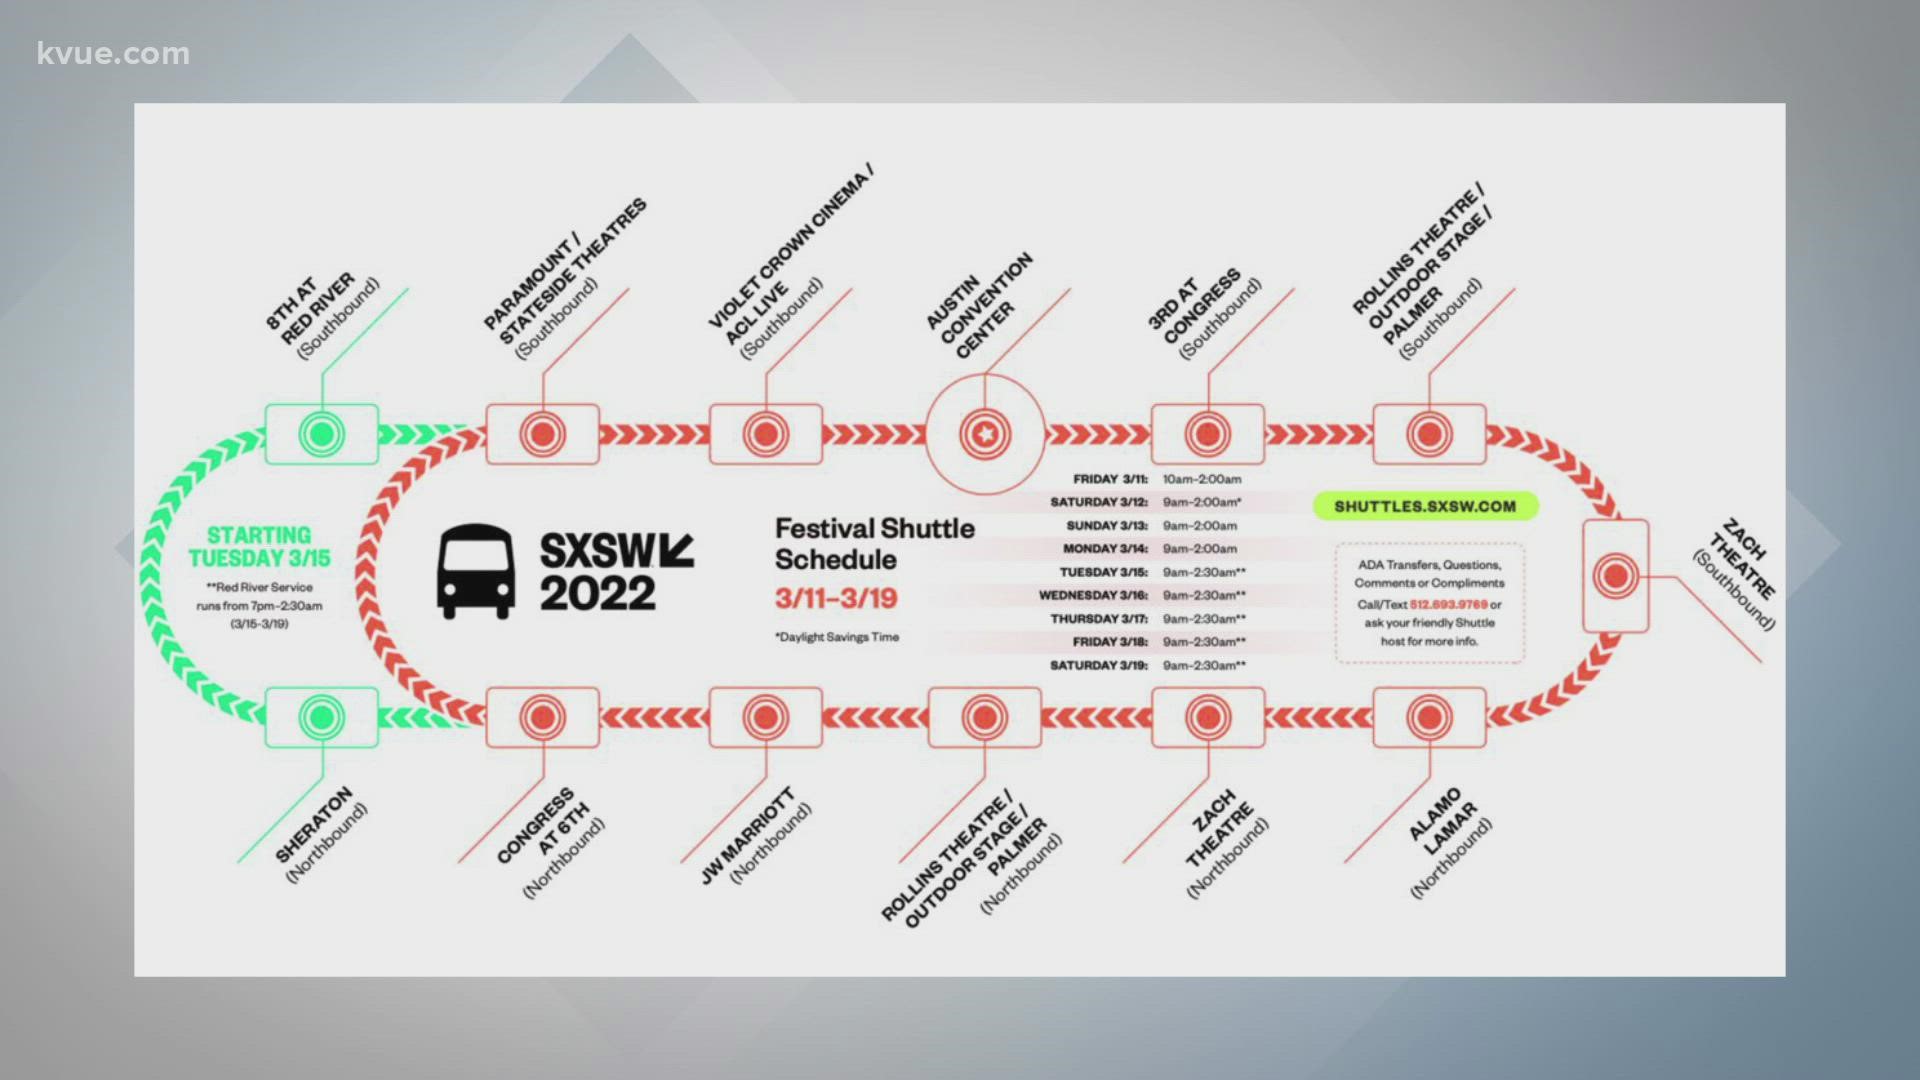 SXSW 2022 is upon us – and that means a lot of traffic. KVUE's Hannah Rucker is keeping an eye on road closures for the festival.